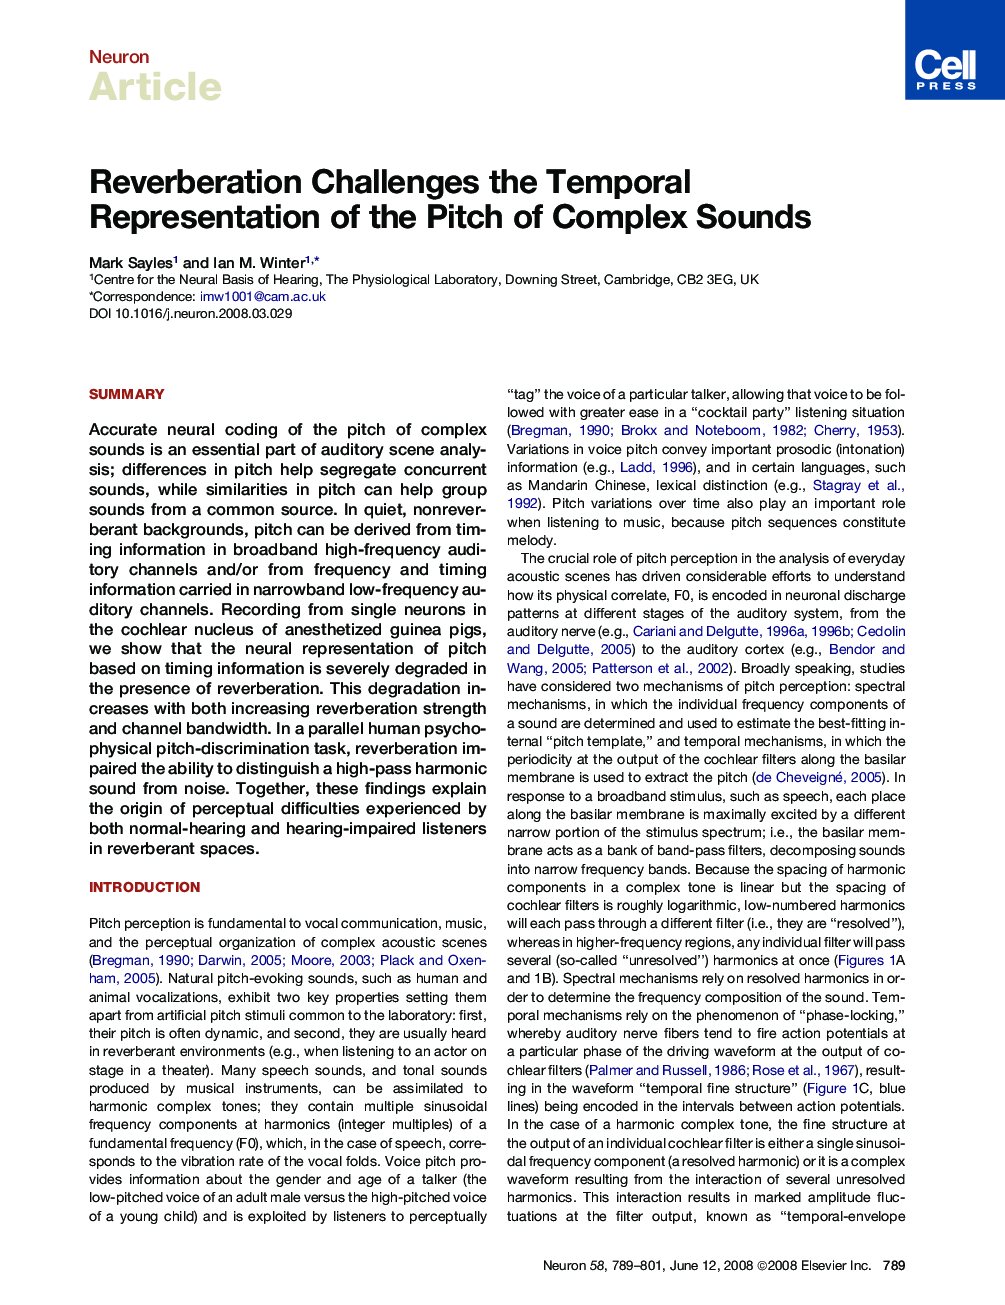 Reverberation Challenges the Temporal Representation of the Pitch of Complex Sounds